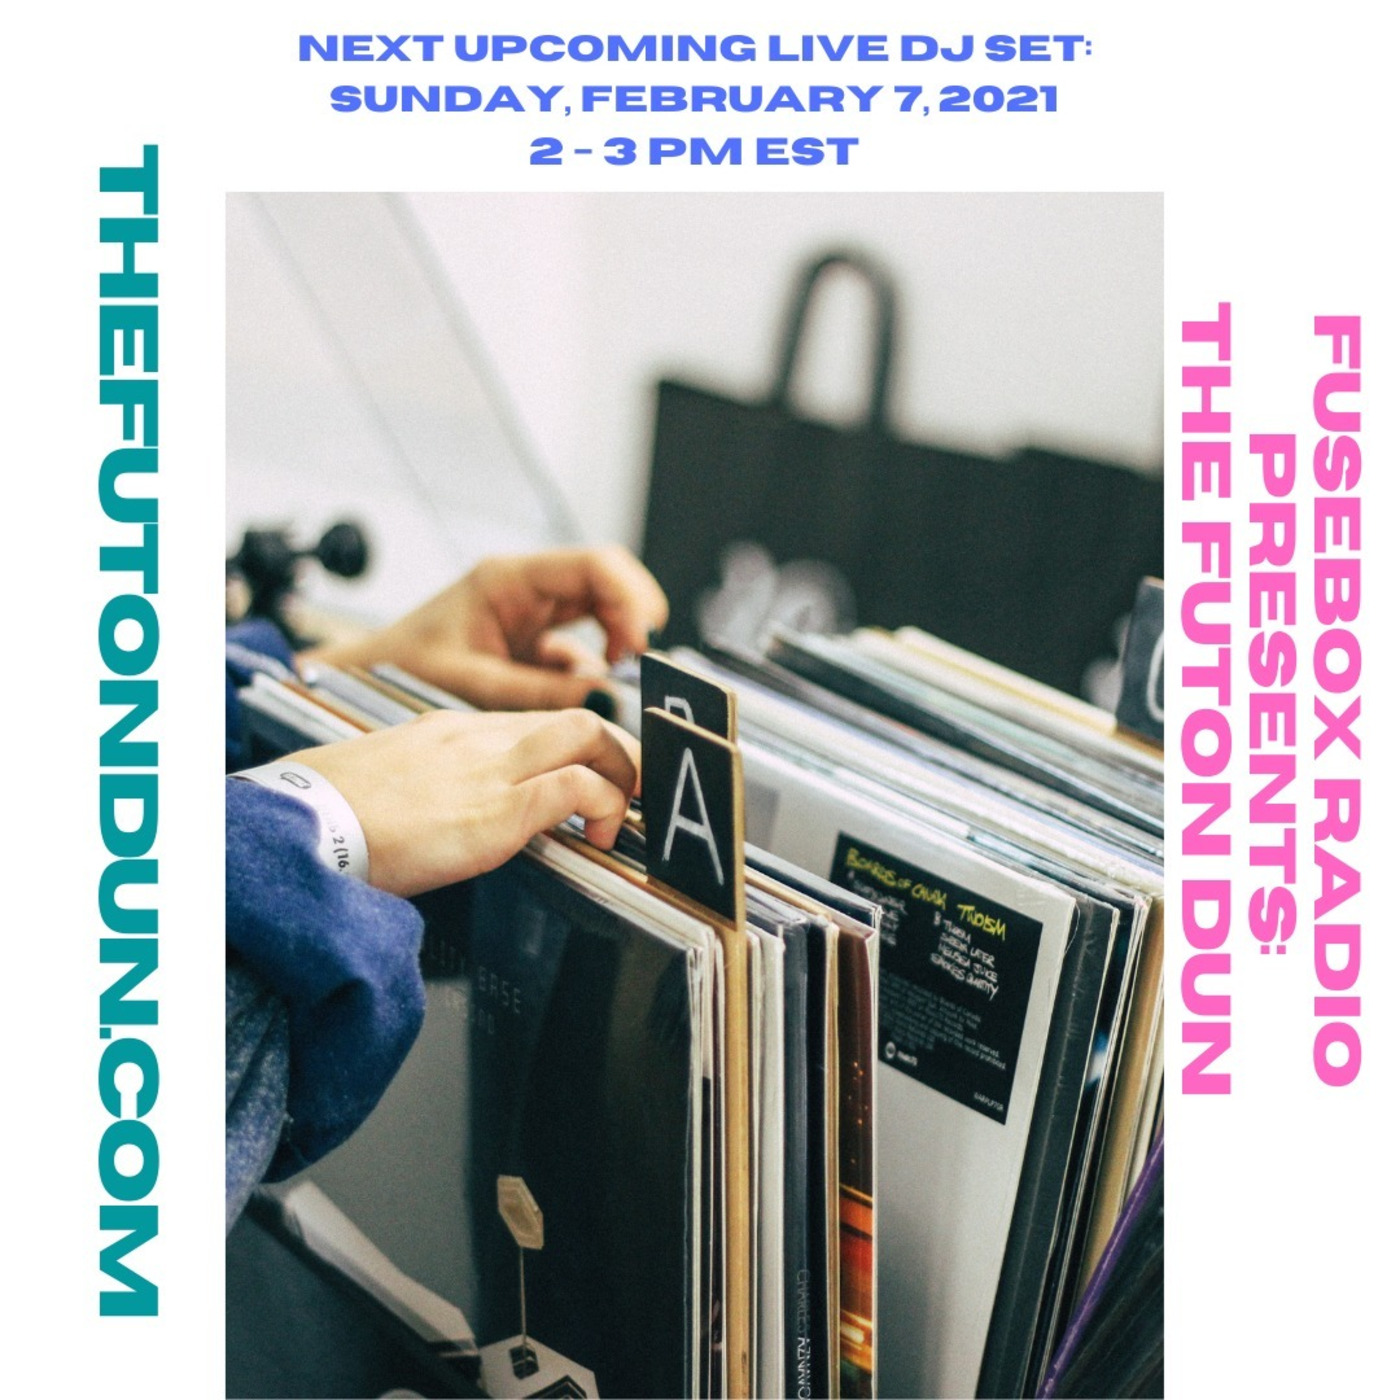 Episode 501: FuseBox Radio #653: REBROADCAST: DJ Fusion's The Futon Dun Livestream DJ Mix Winter Session #2 (B'More and NJ Brunch In The House Music Mix)